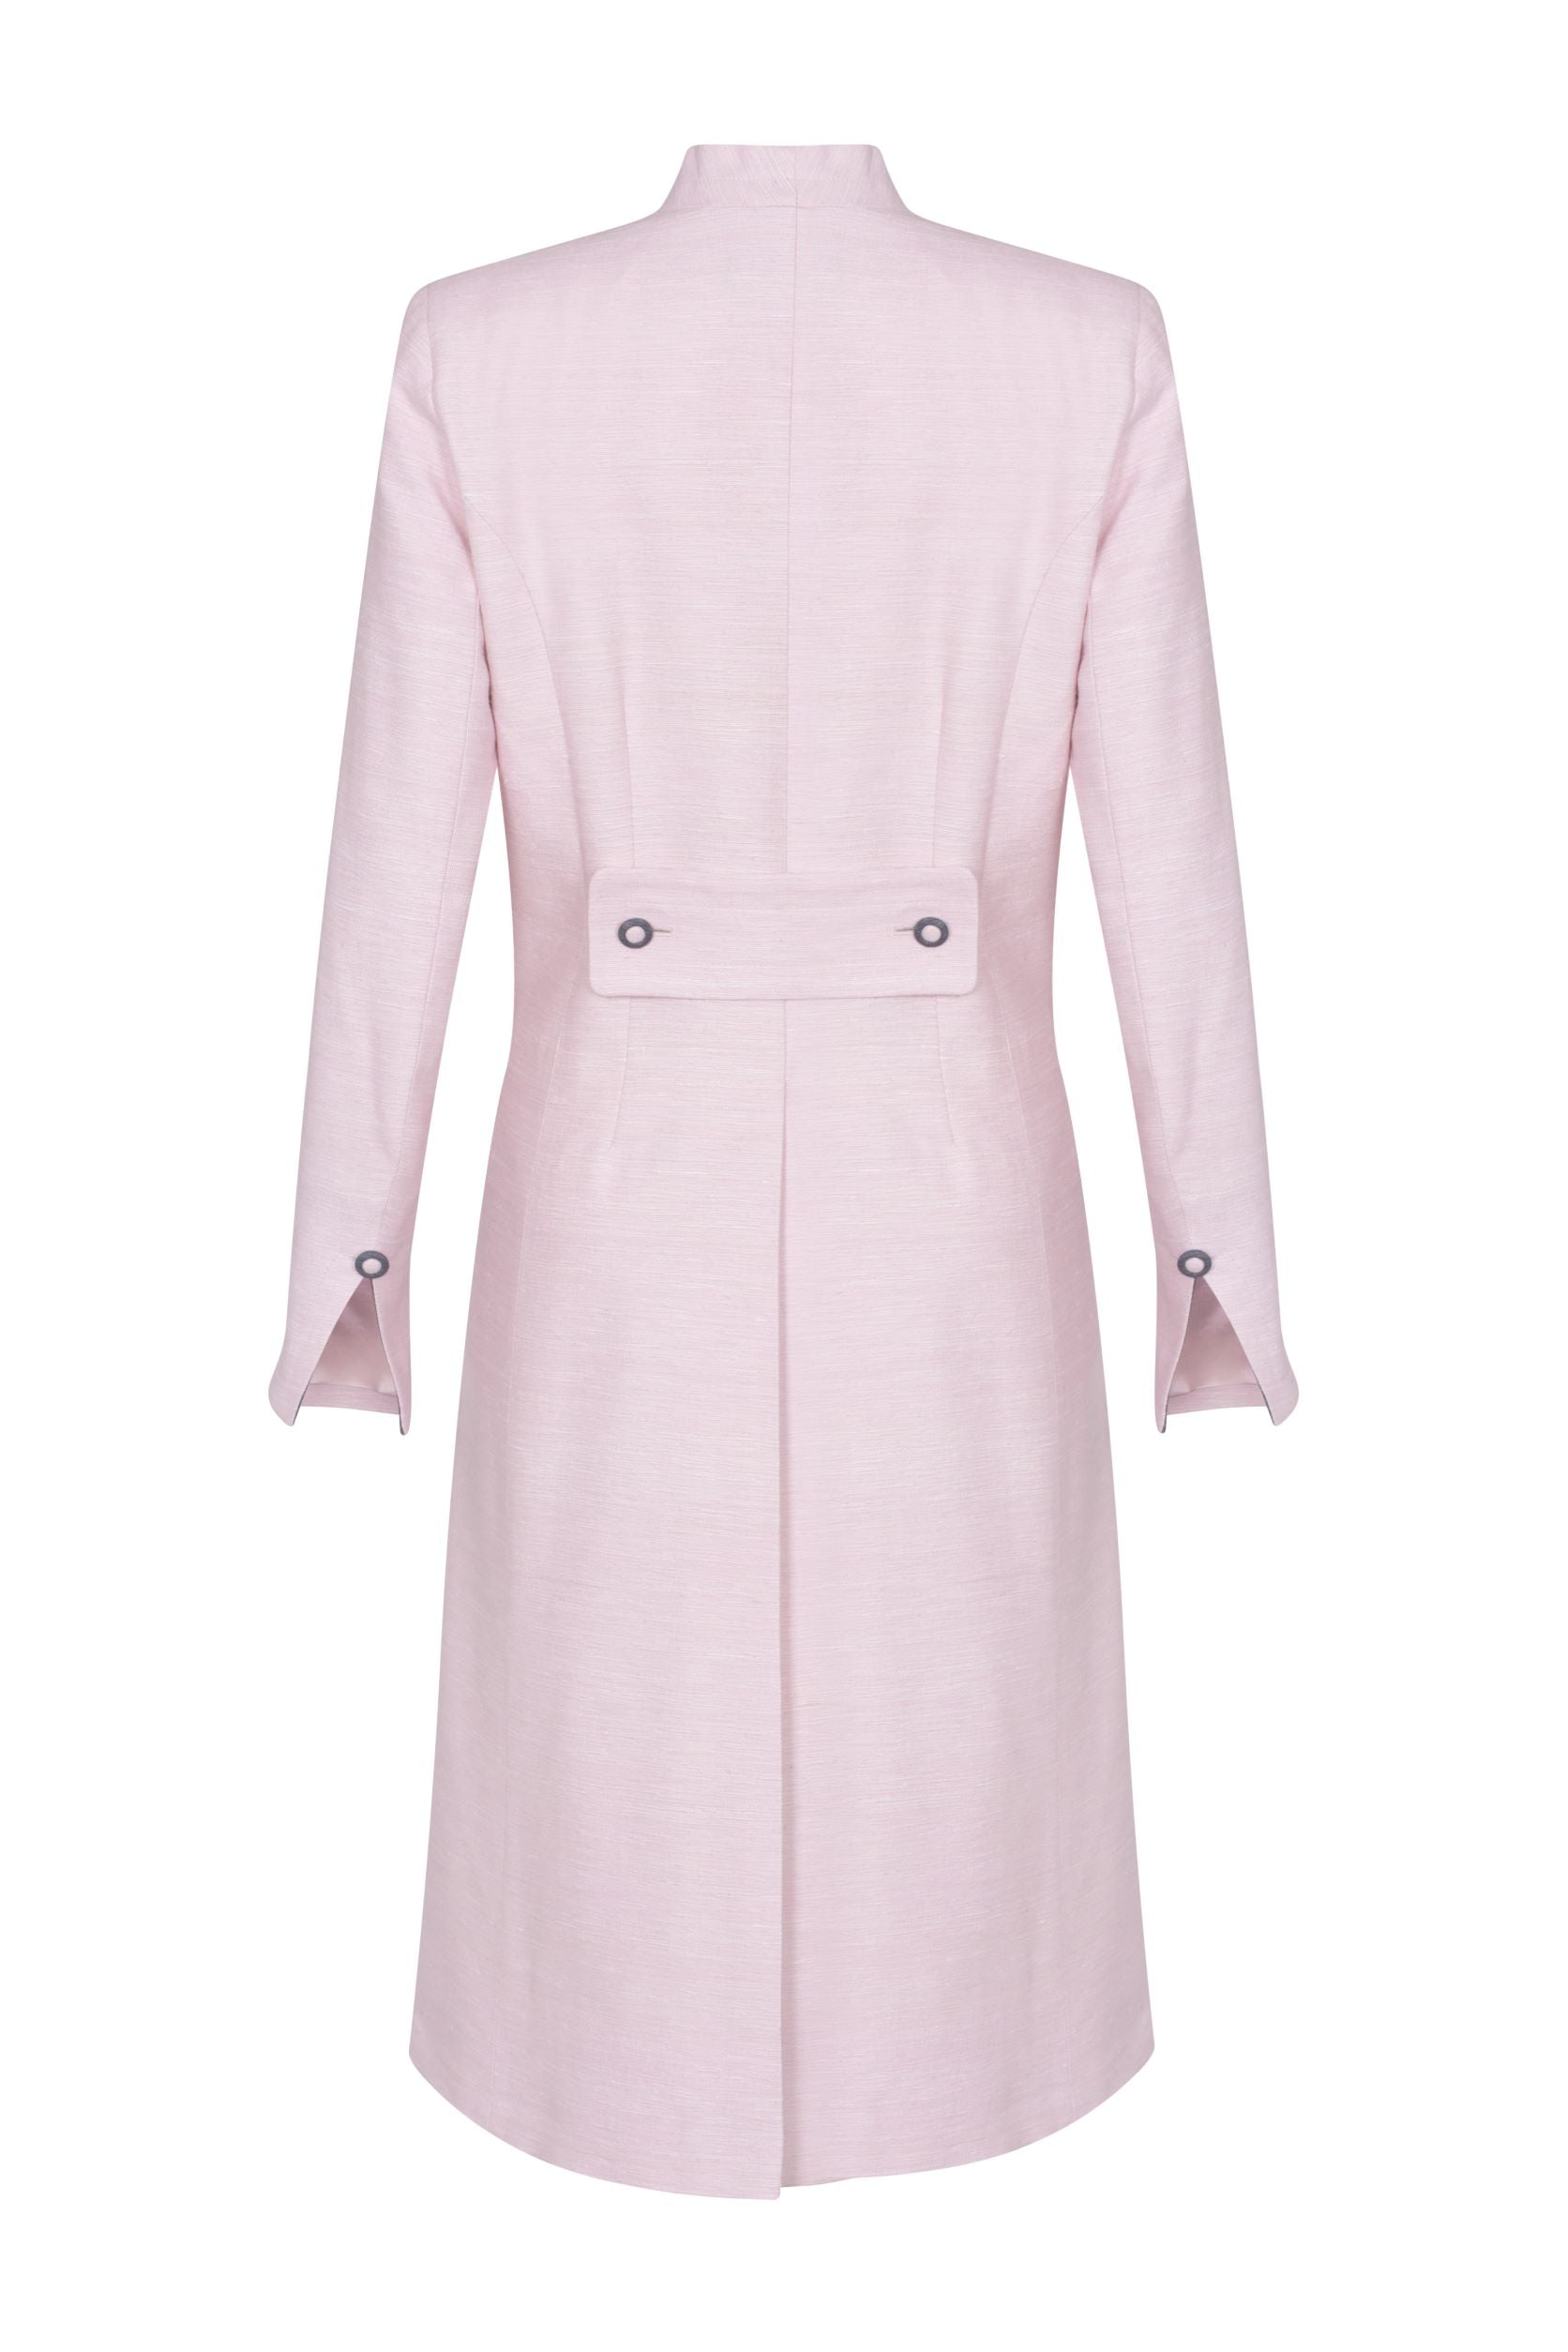 Silk Duster Coat in Pale Pastel Pink with Slate Grey Trim - Leila